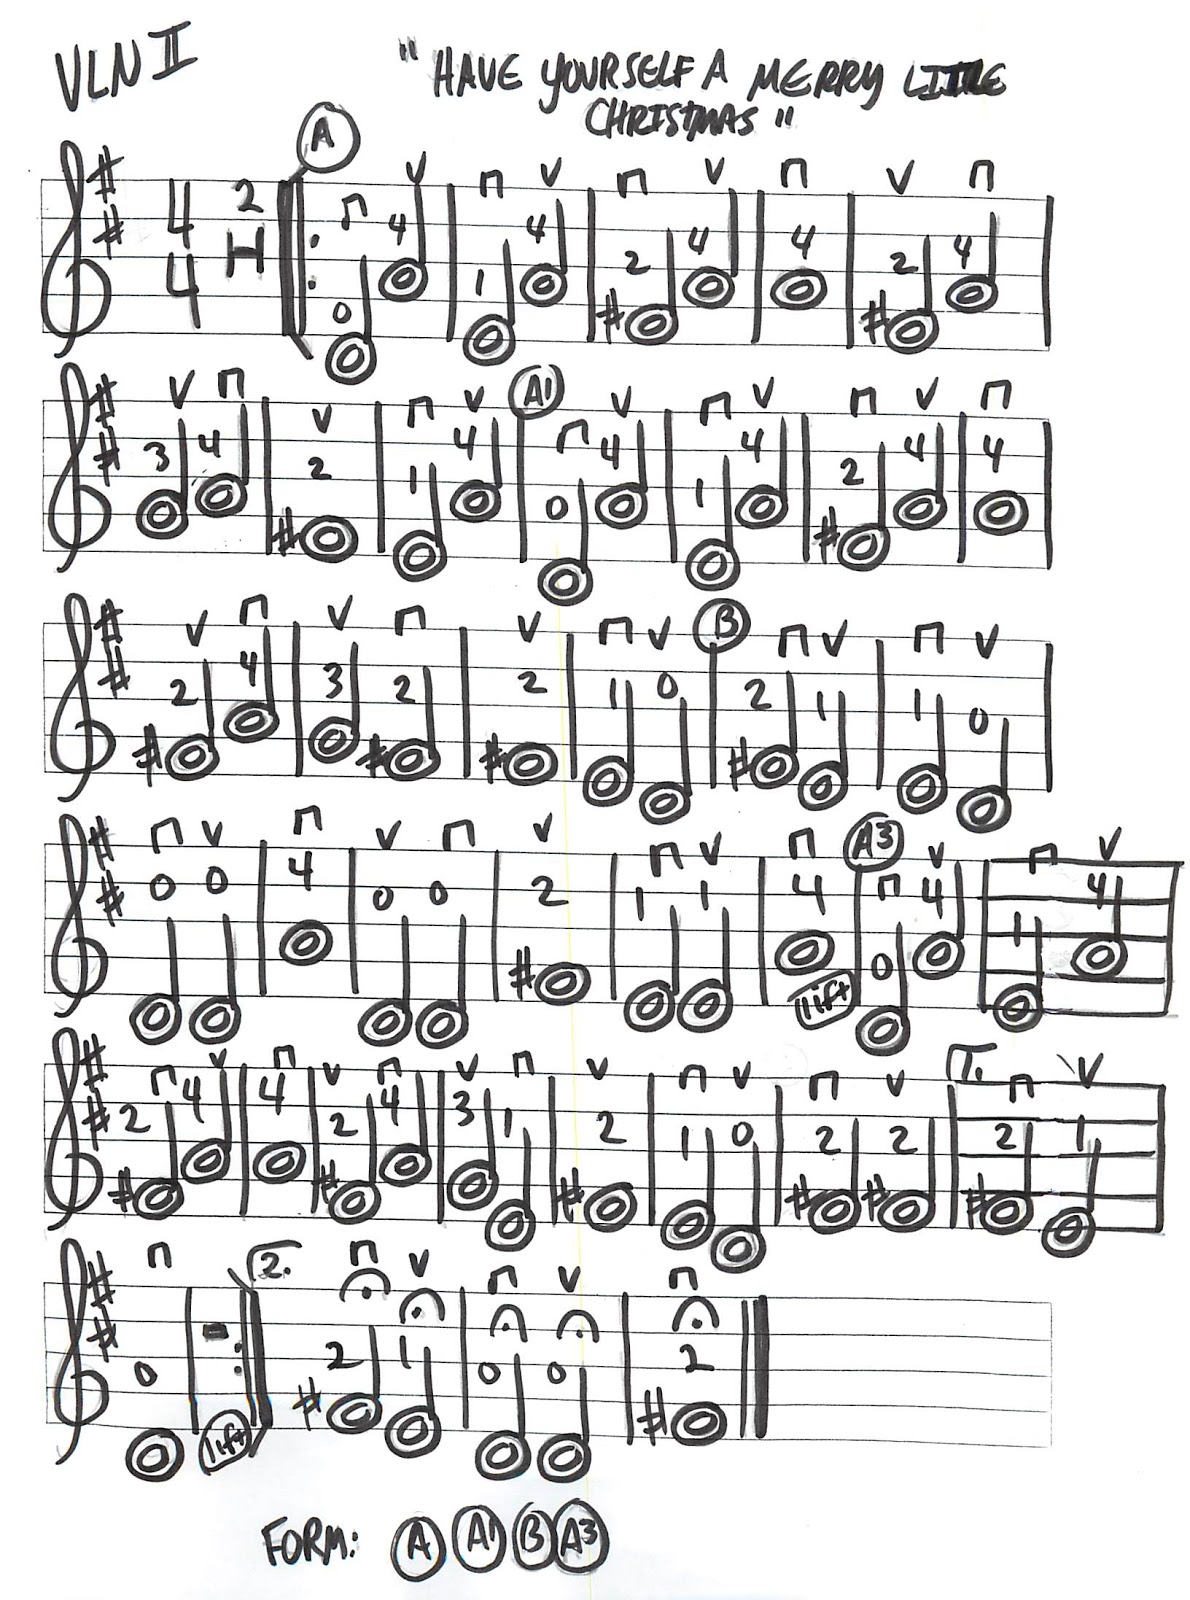 Miss Jacobson's Music: HAVE YOURSELF A MERRY LITTLE CHRISTMAS WORKSHEETS